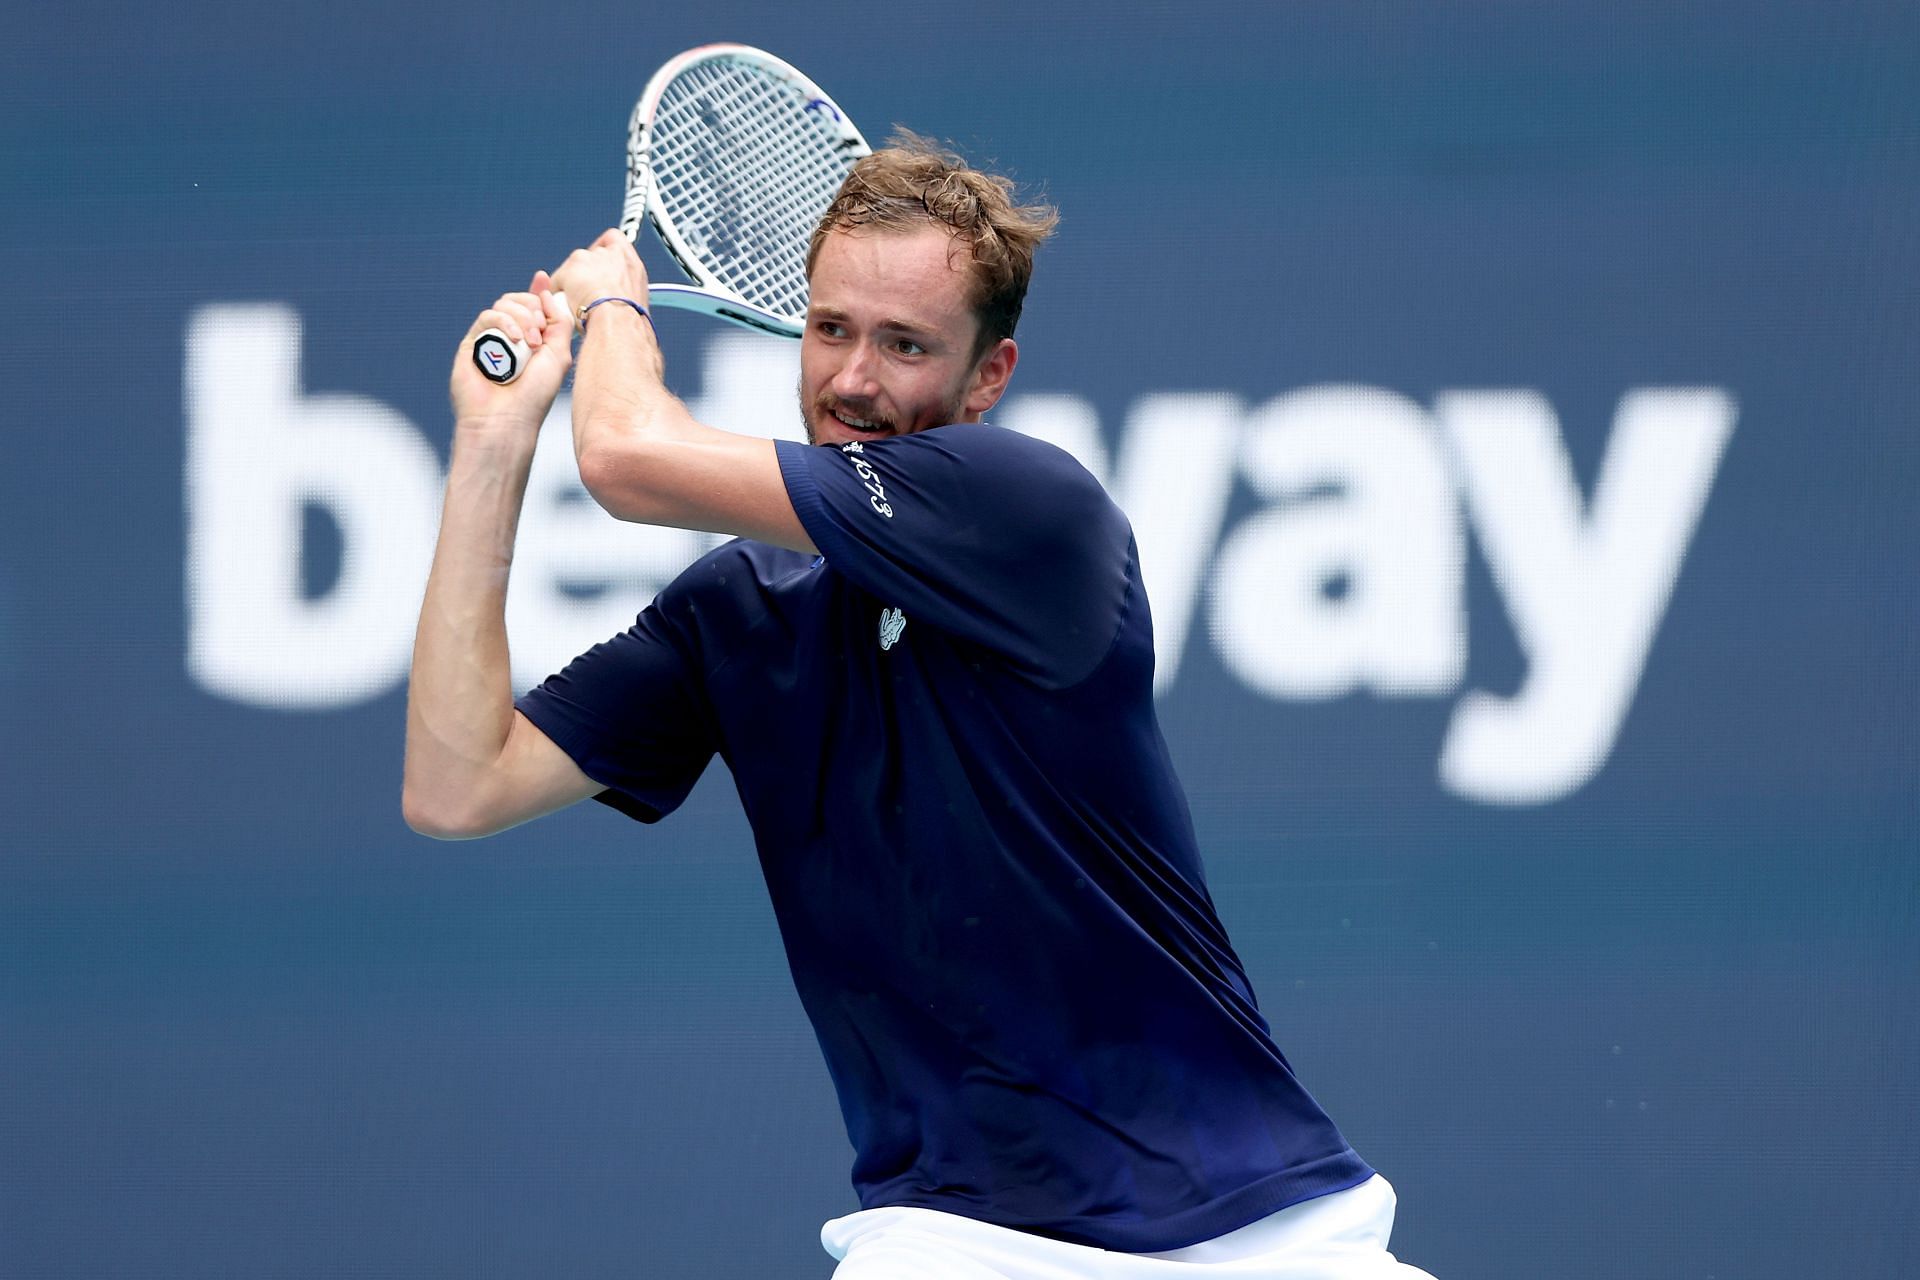 Daniil Medvedev in action during the 2022 Miami Open - Day 11